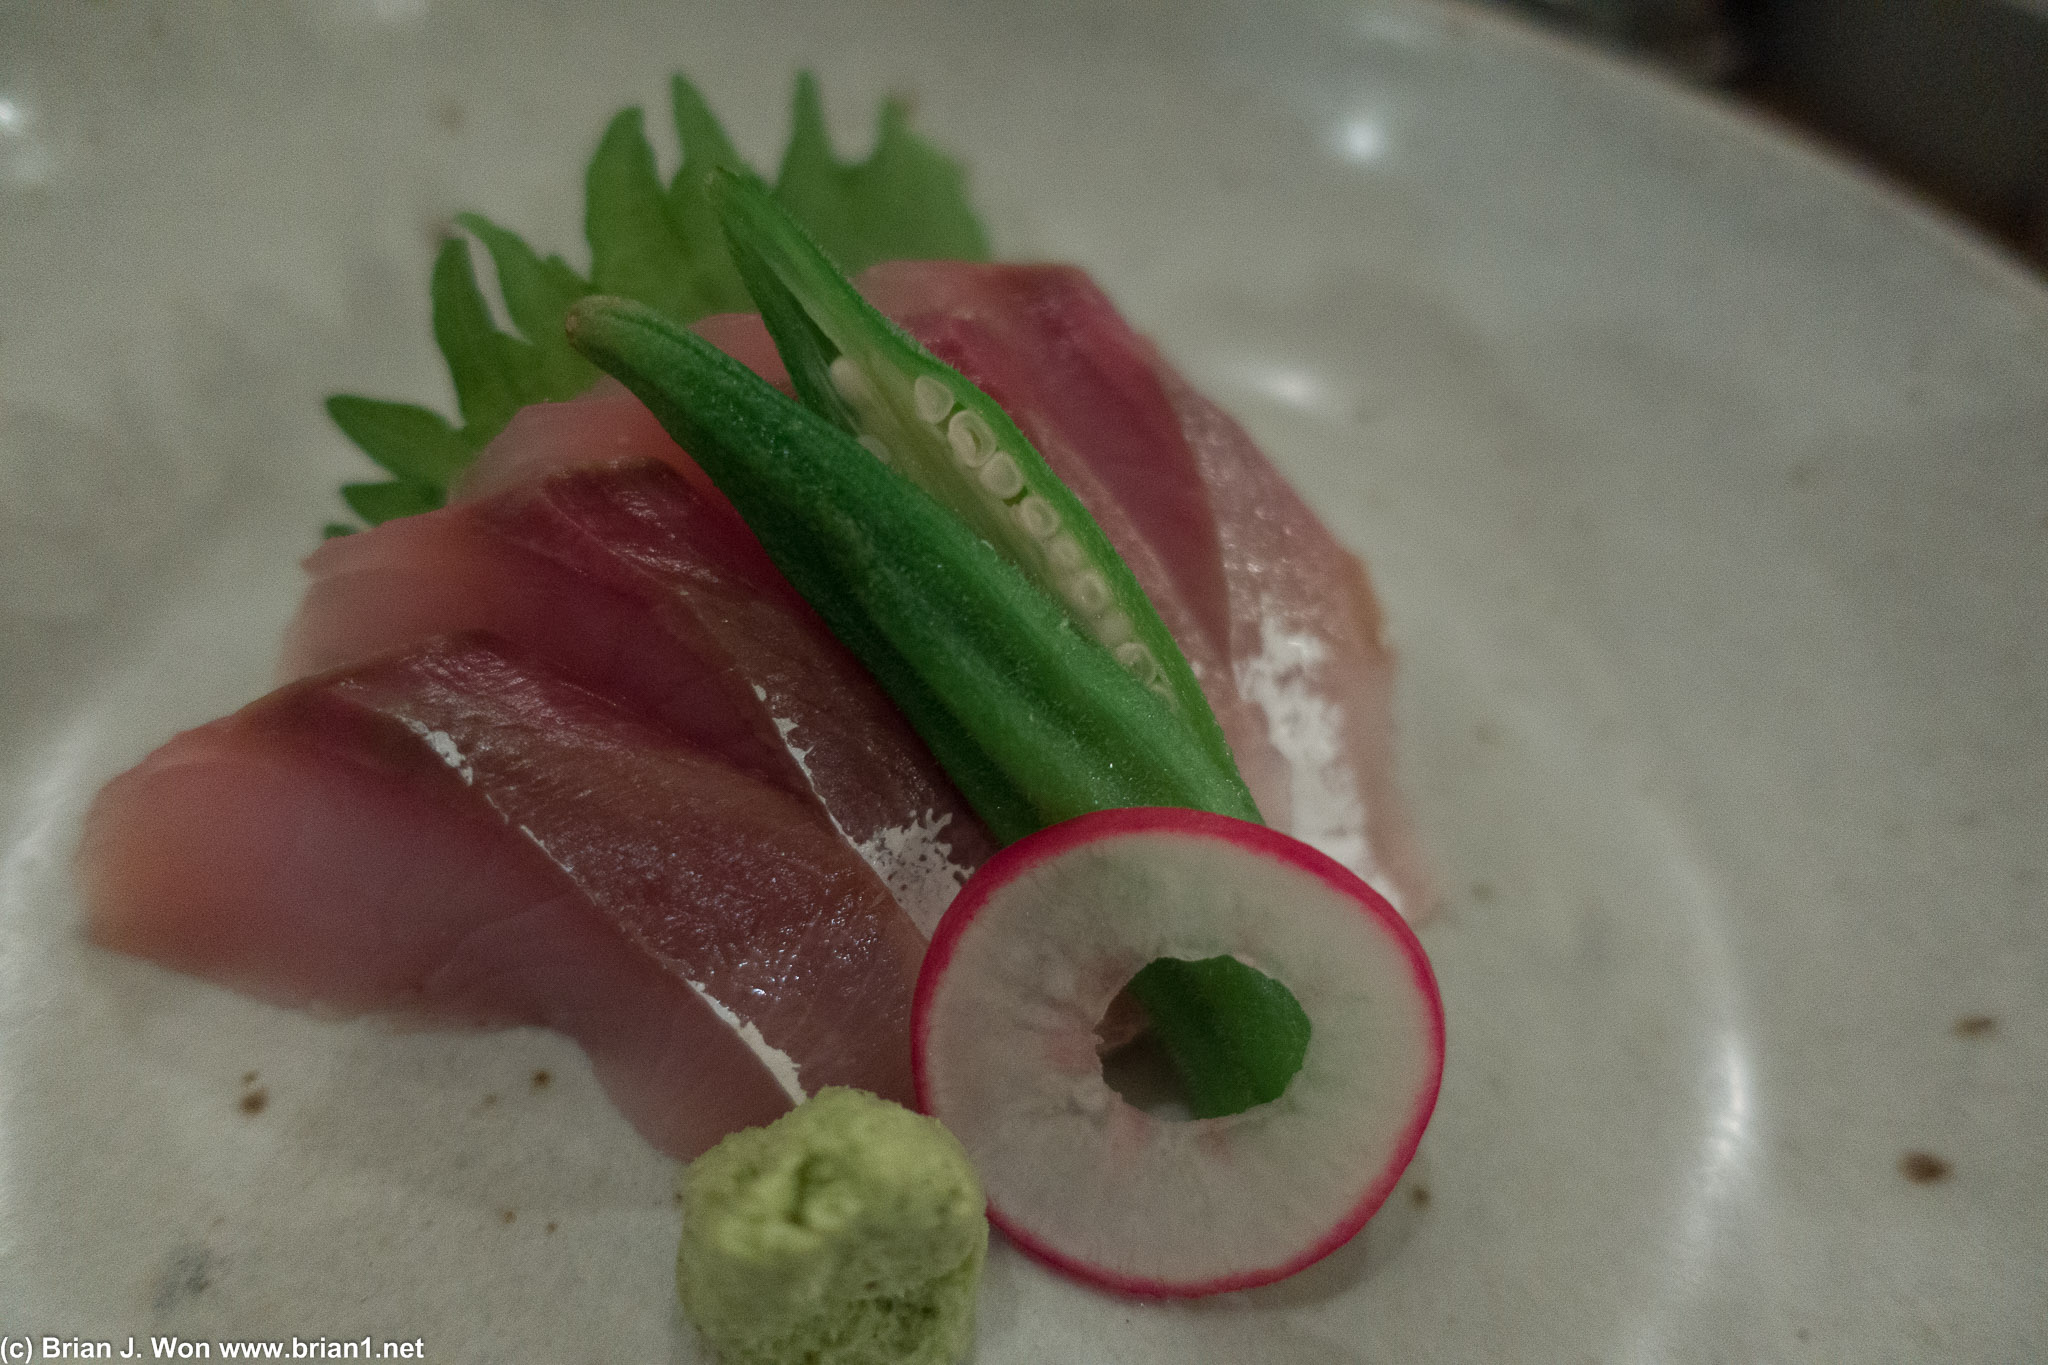 Baby yellowtail. Kinda tough and chewy compared to the toro, disappointing.